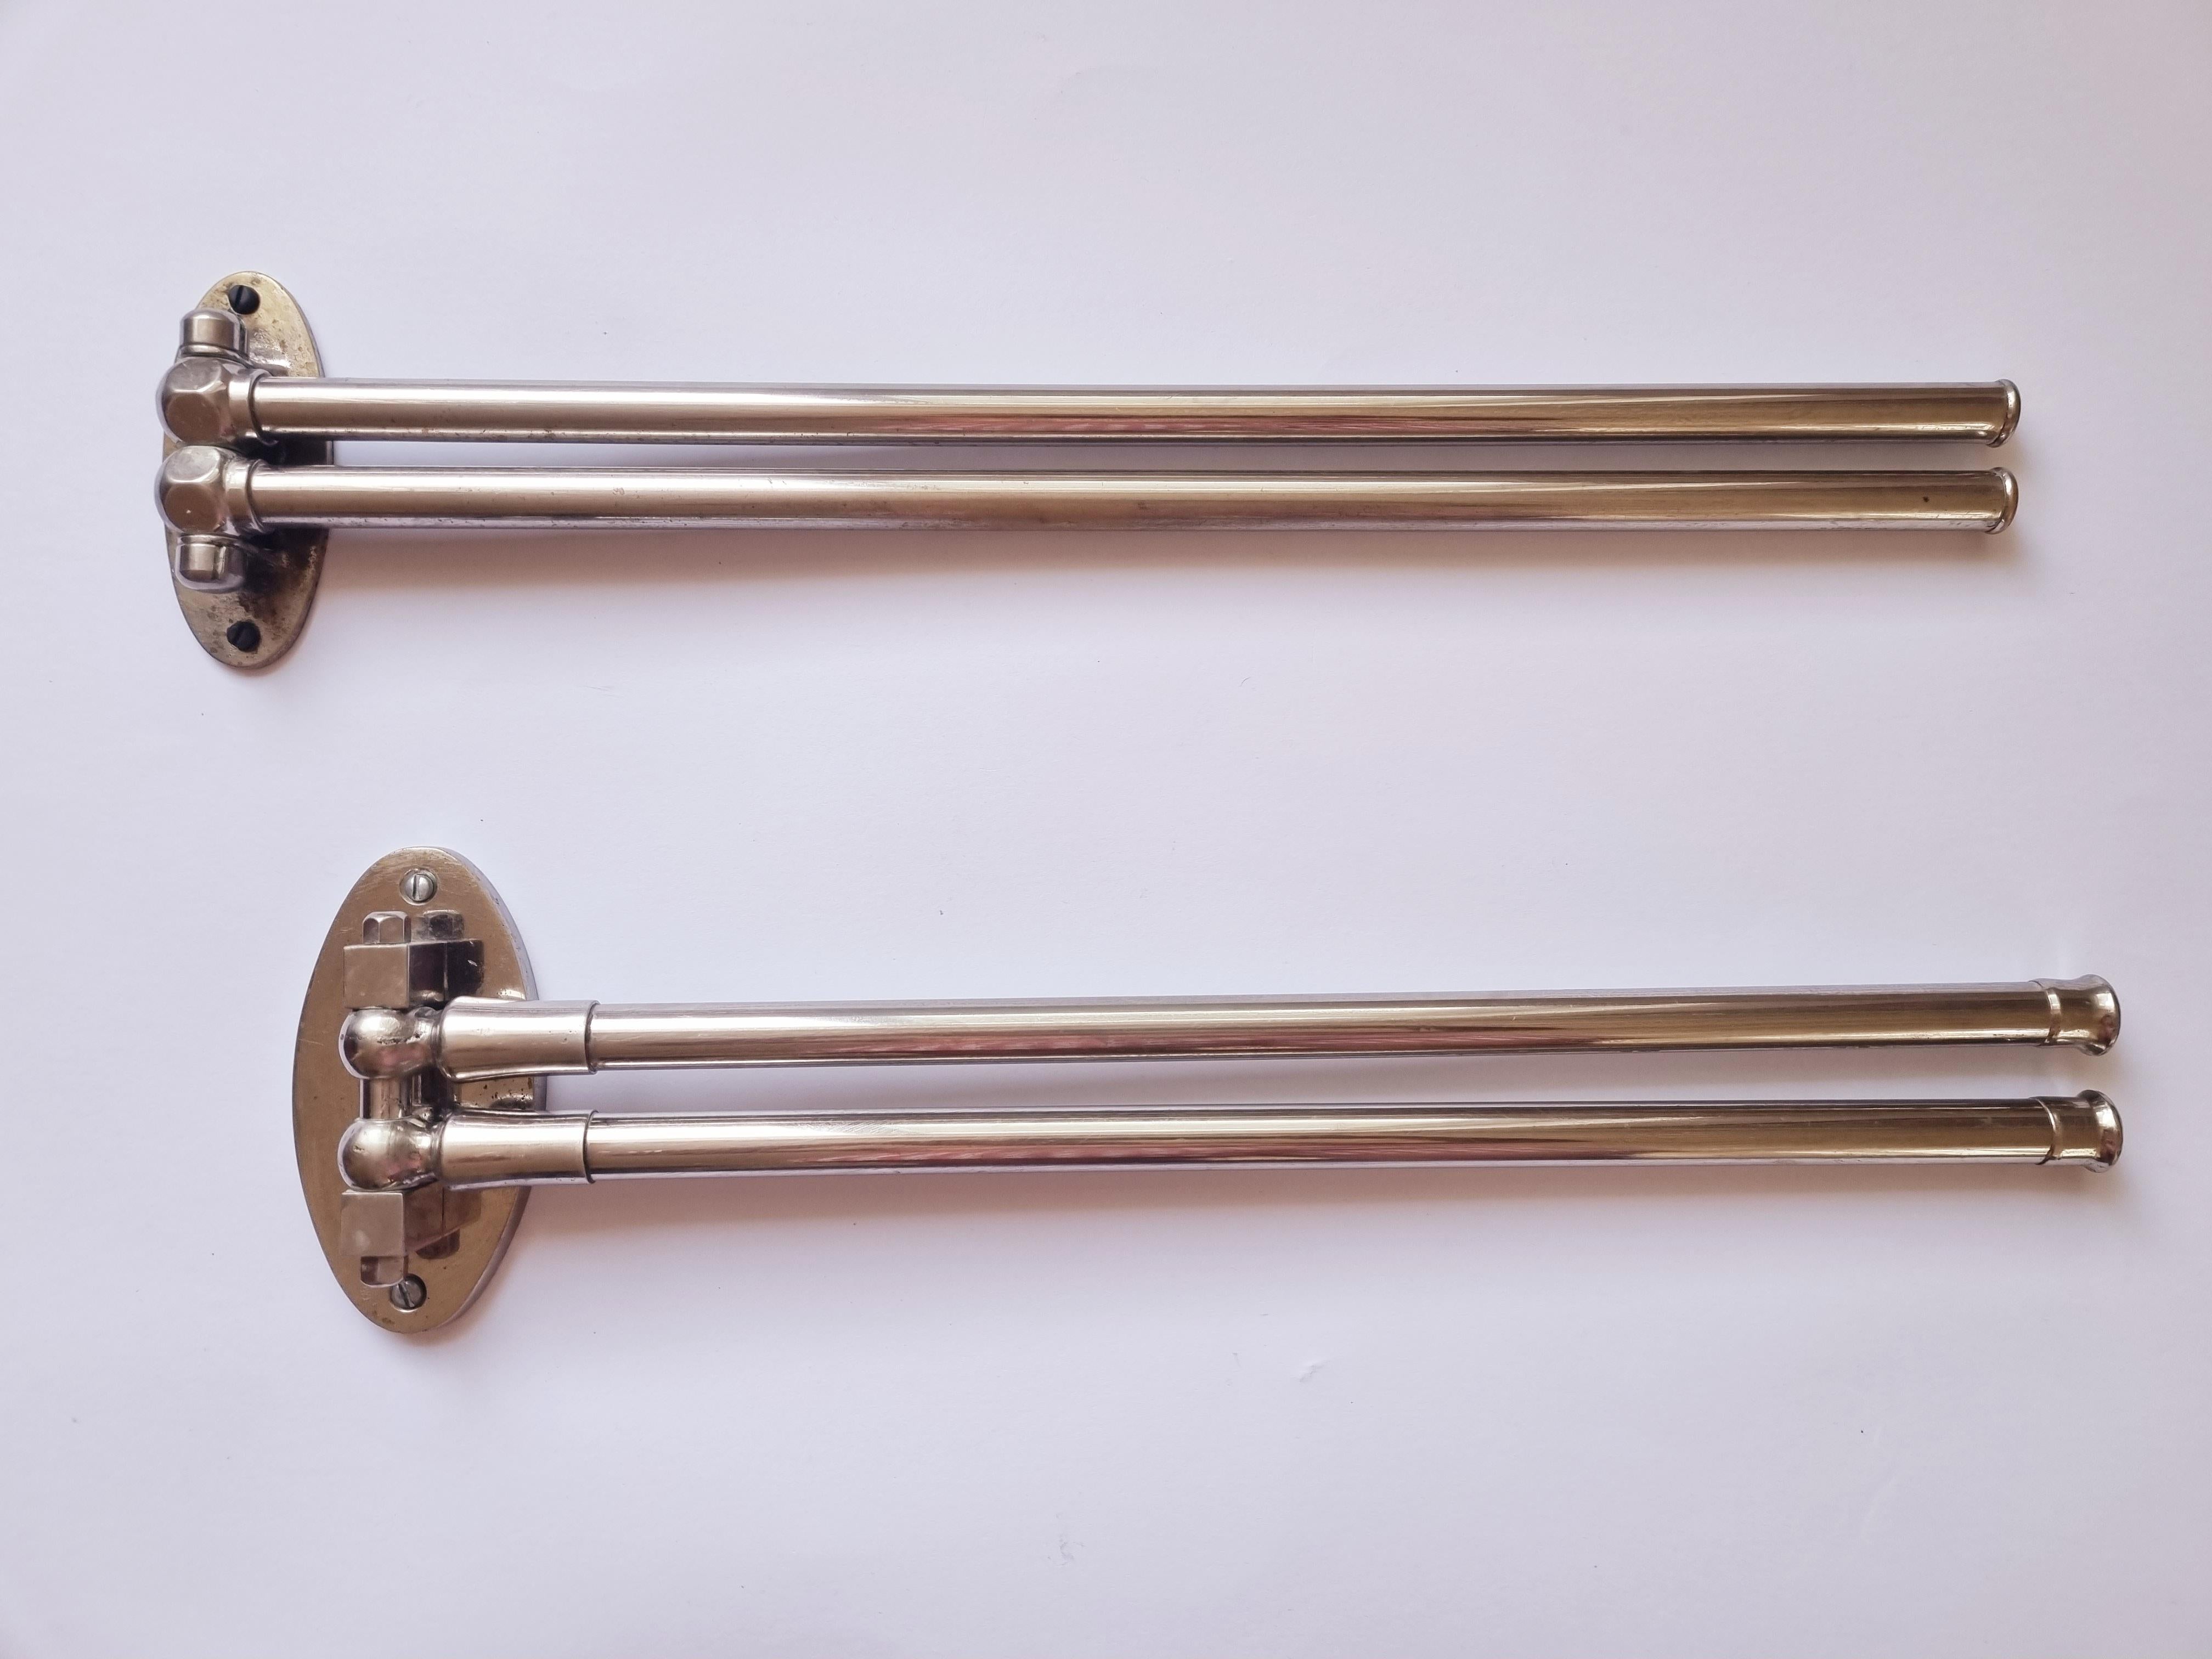 Bauhaus Set of Two Functionalism, Art Deco Chrome Towel Holders, 1930s For Sale